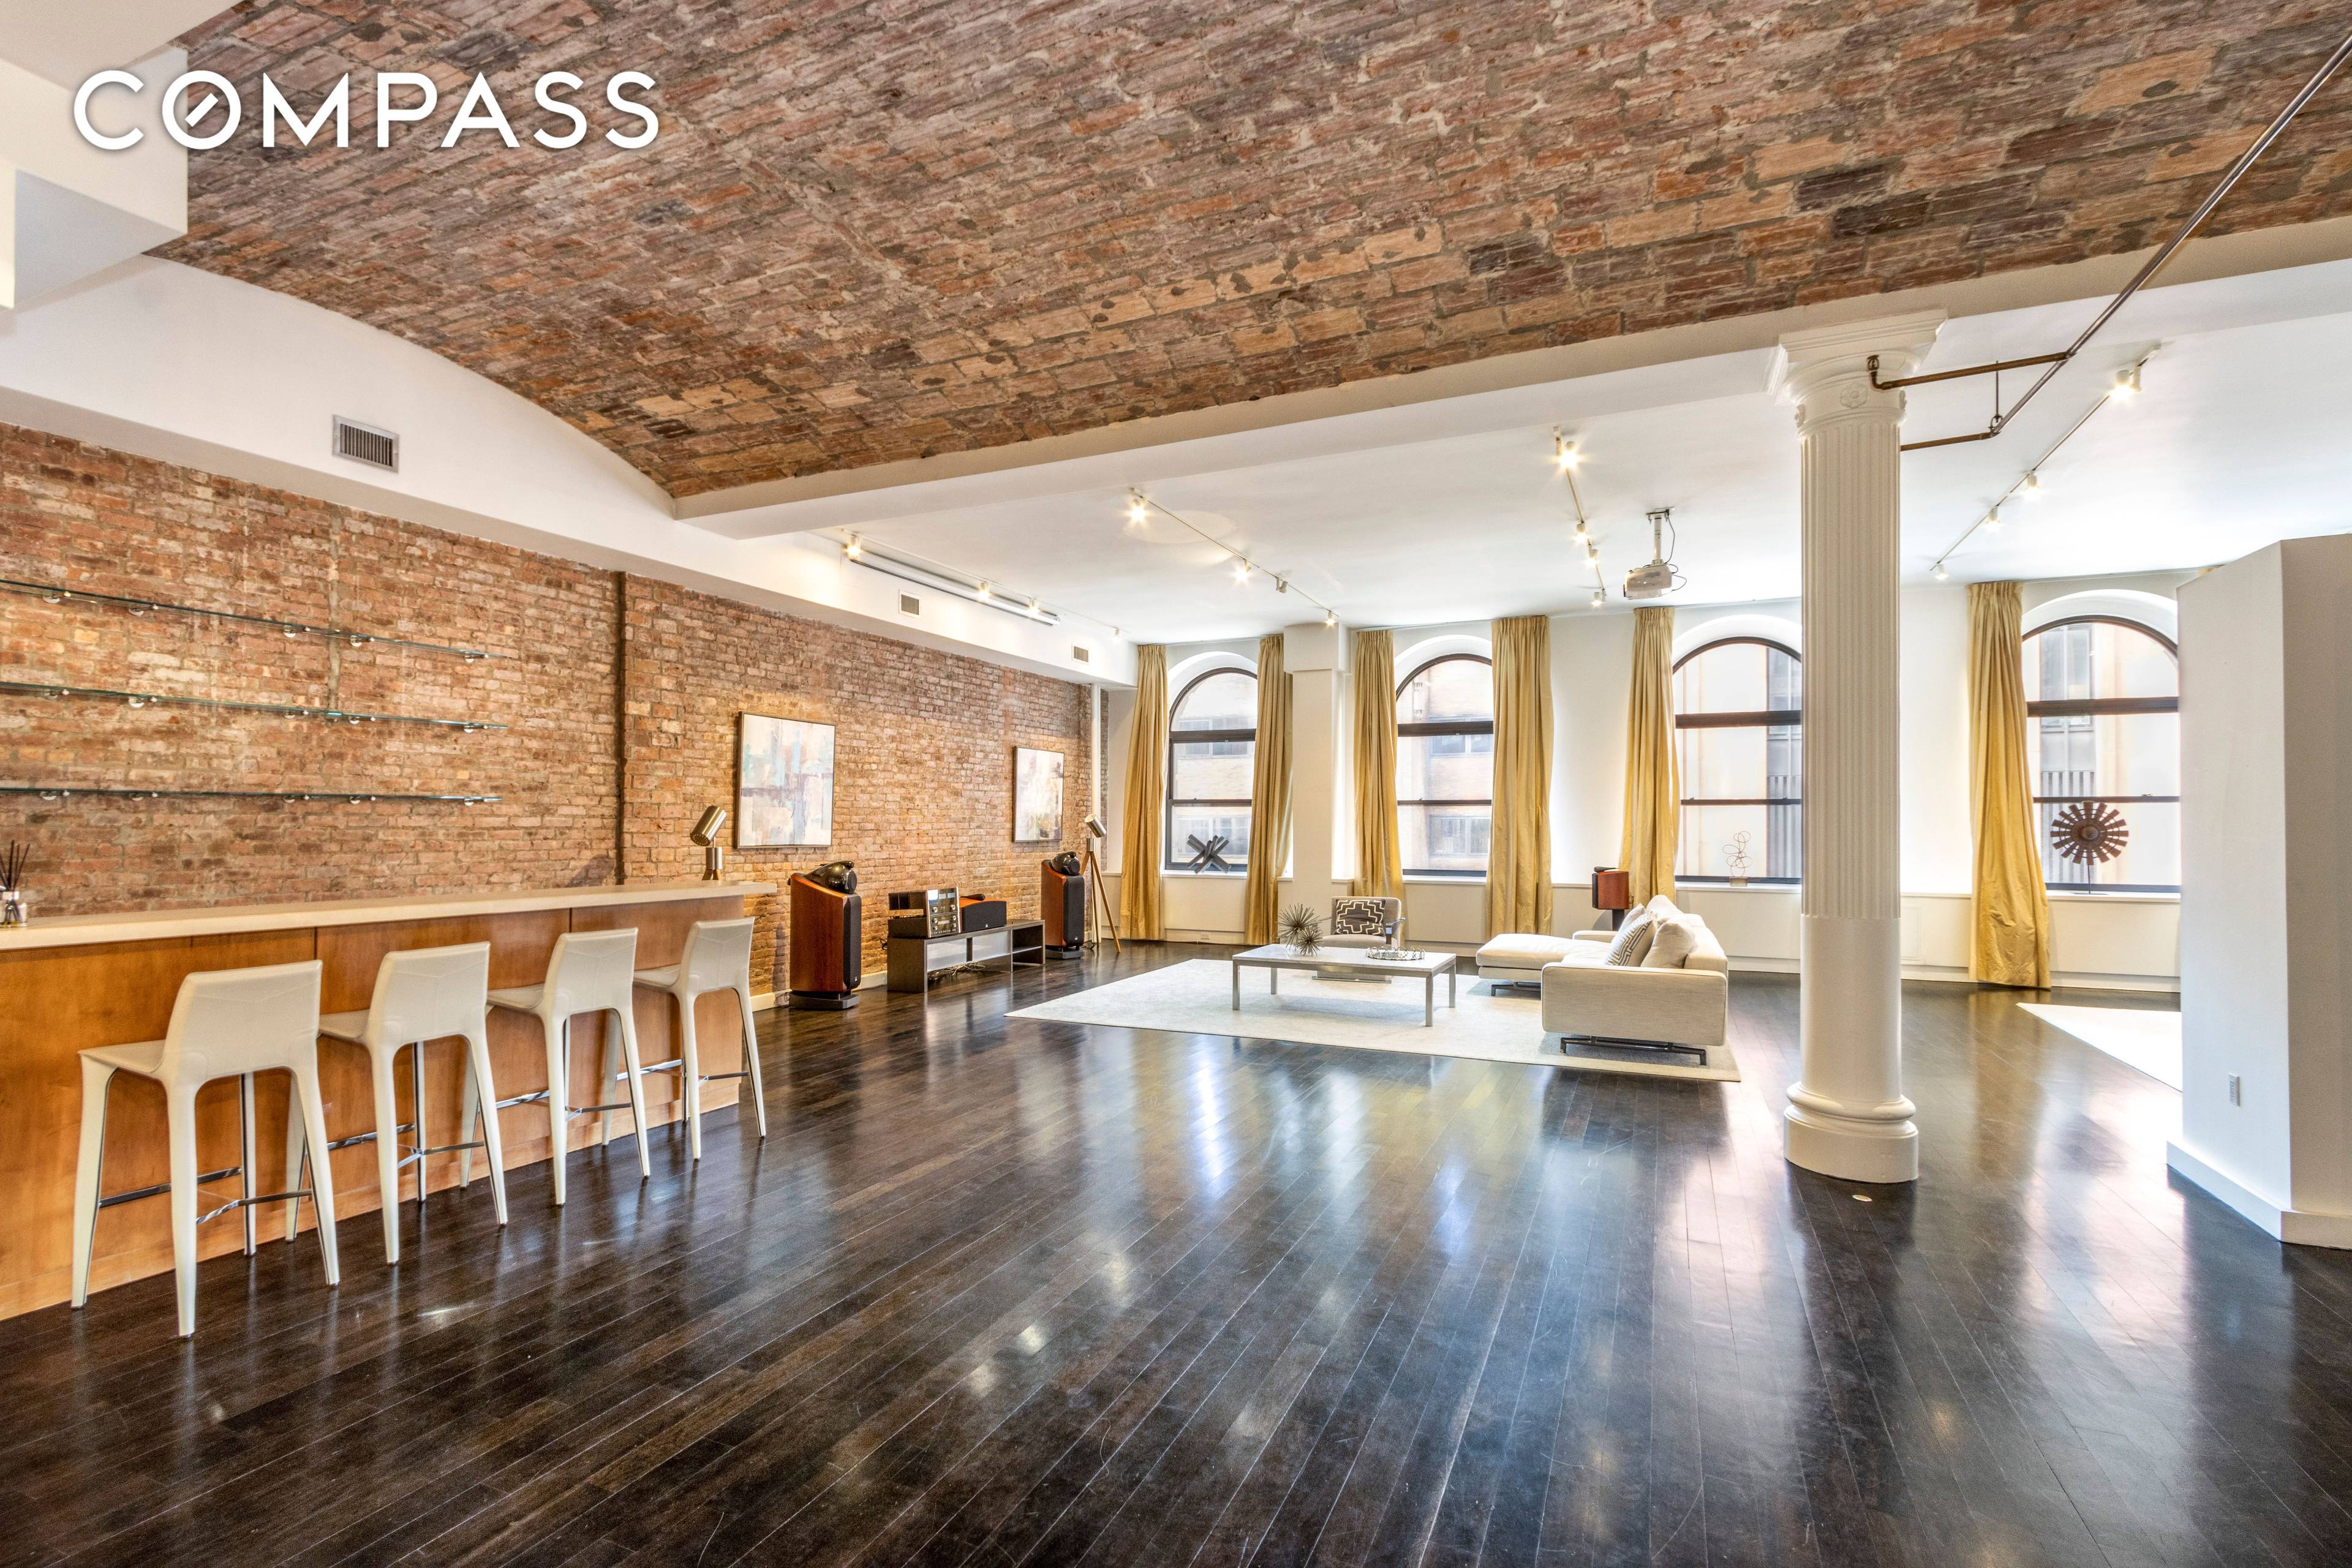 A cavernous, floor through loft that spreads across 4, 800 SF of pristine living space, this 3 bedroom, 3.